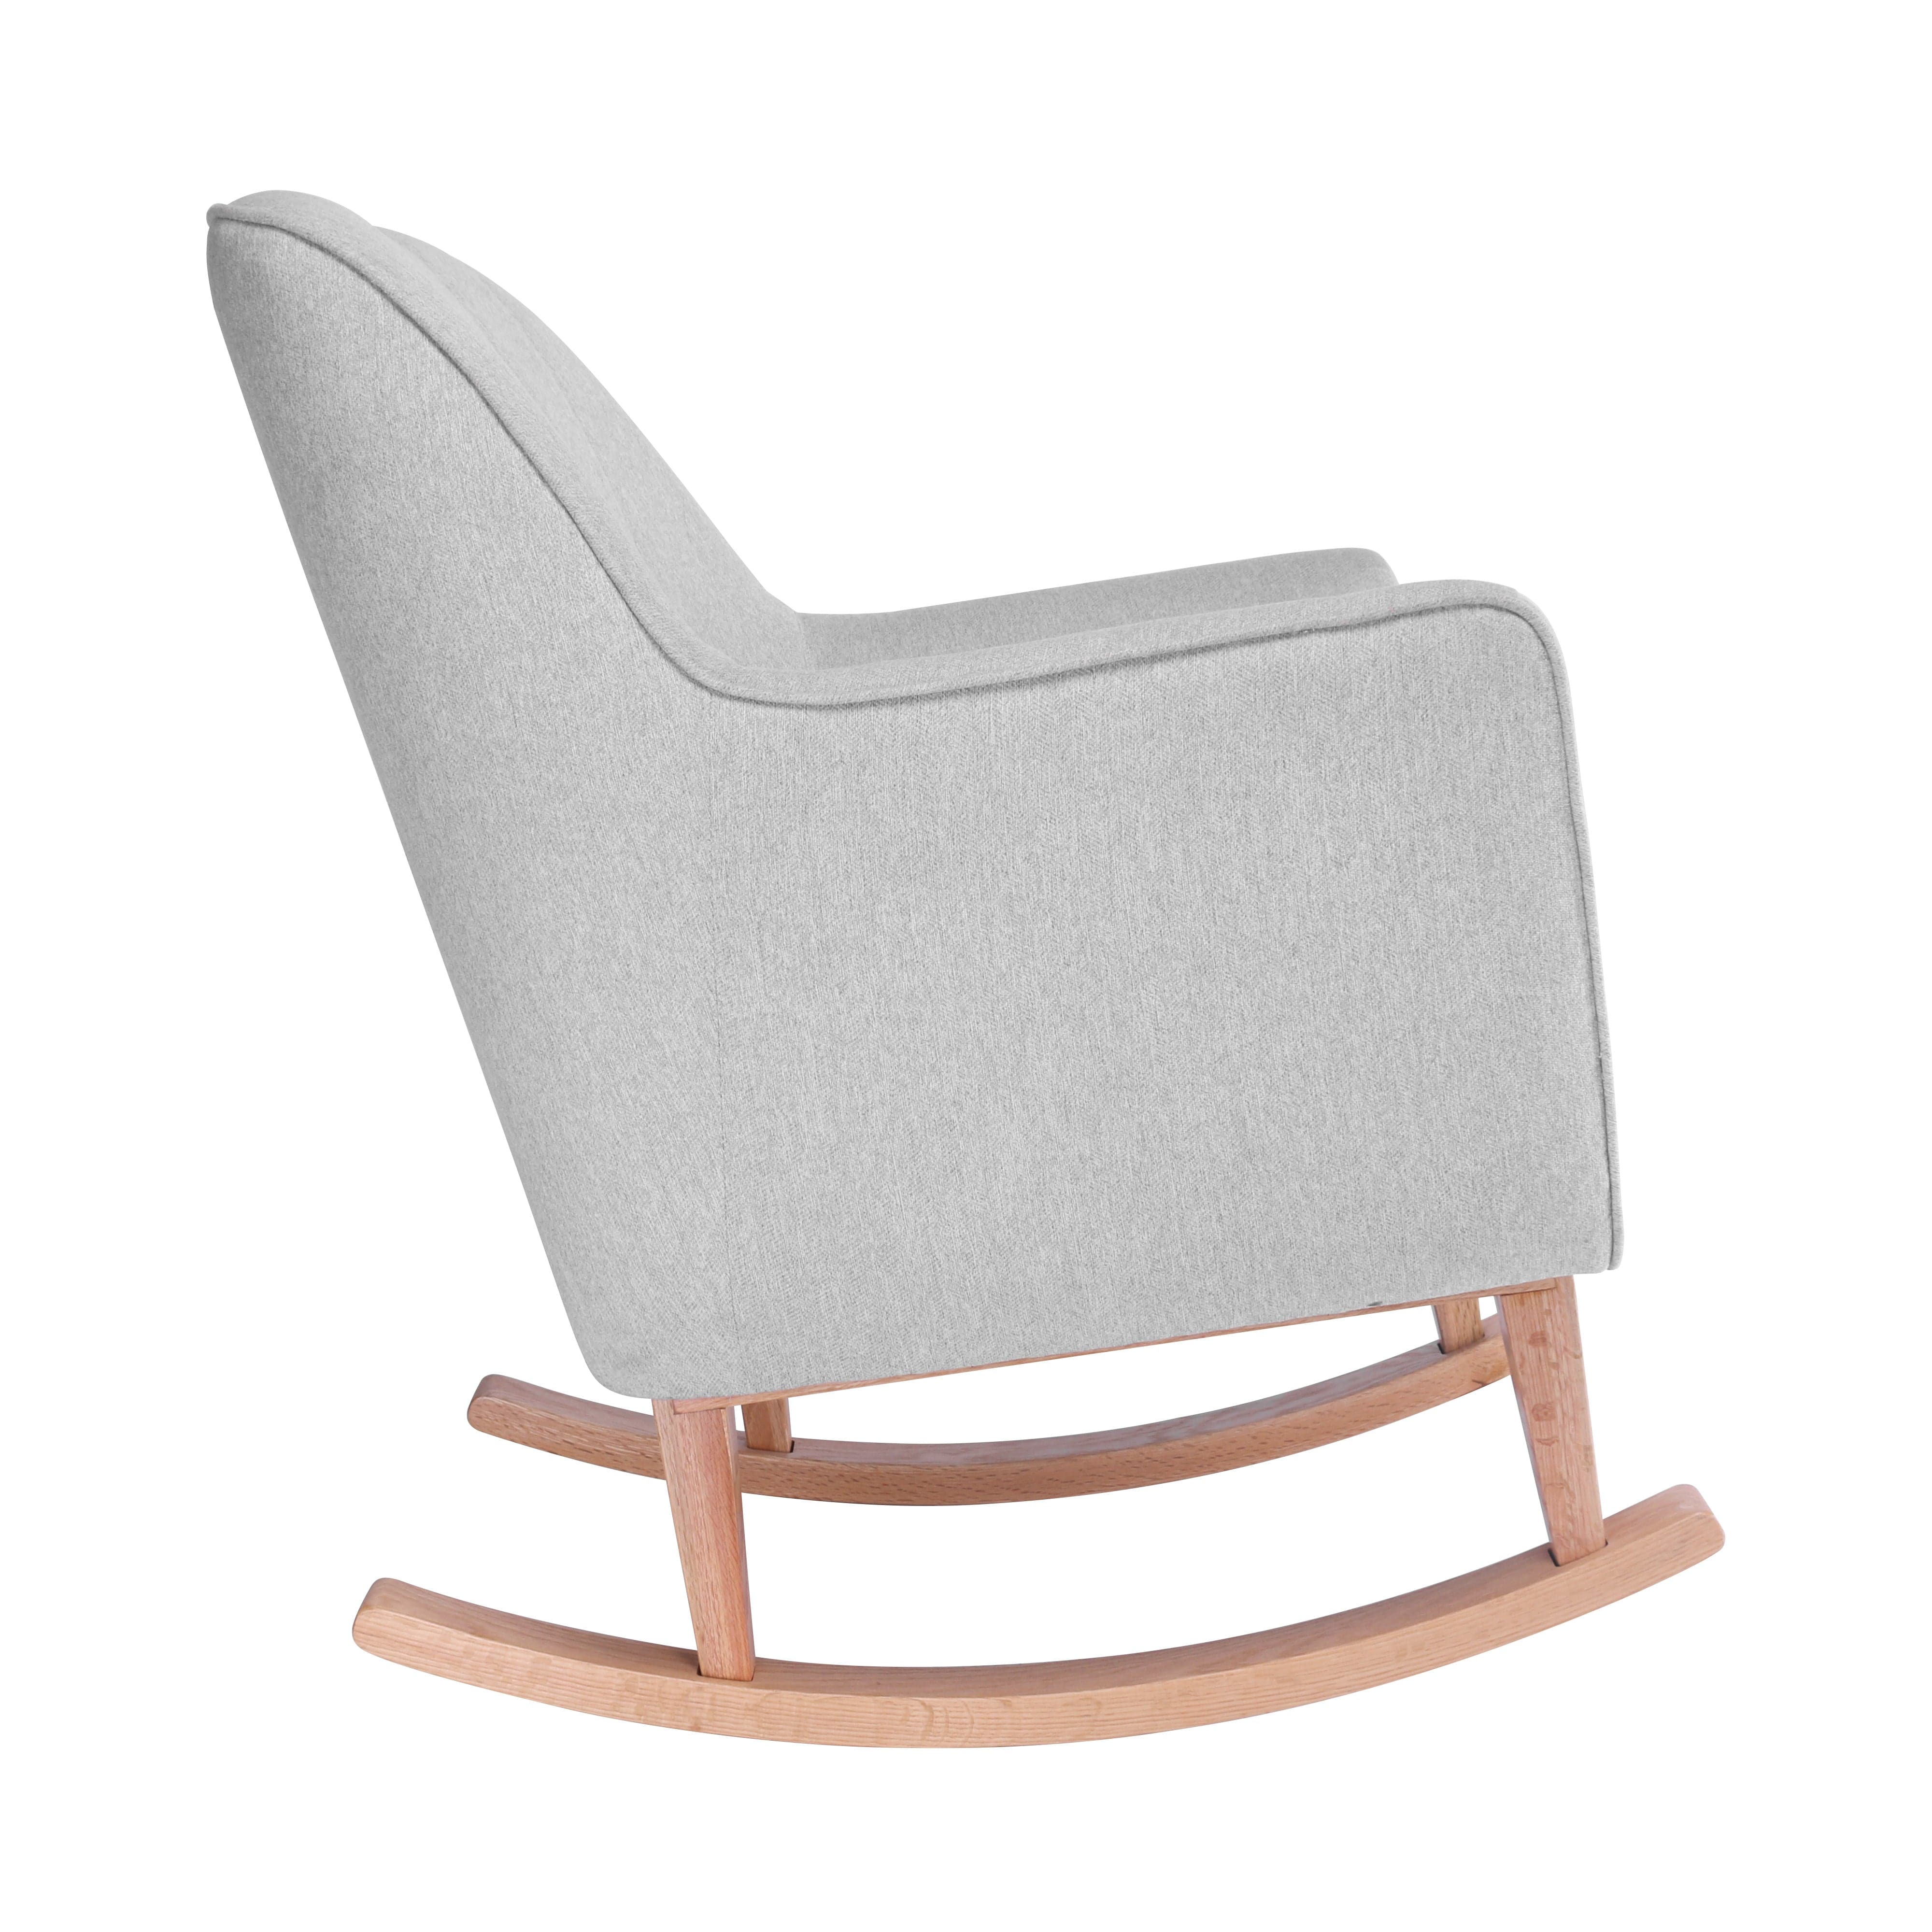 Tutti Bambini Noah Rocking Chair - Pebble/Grey -  | For Your Little One